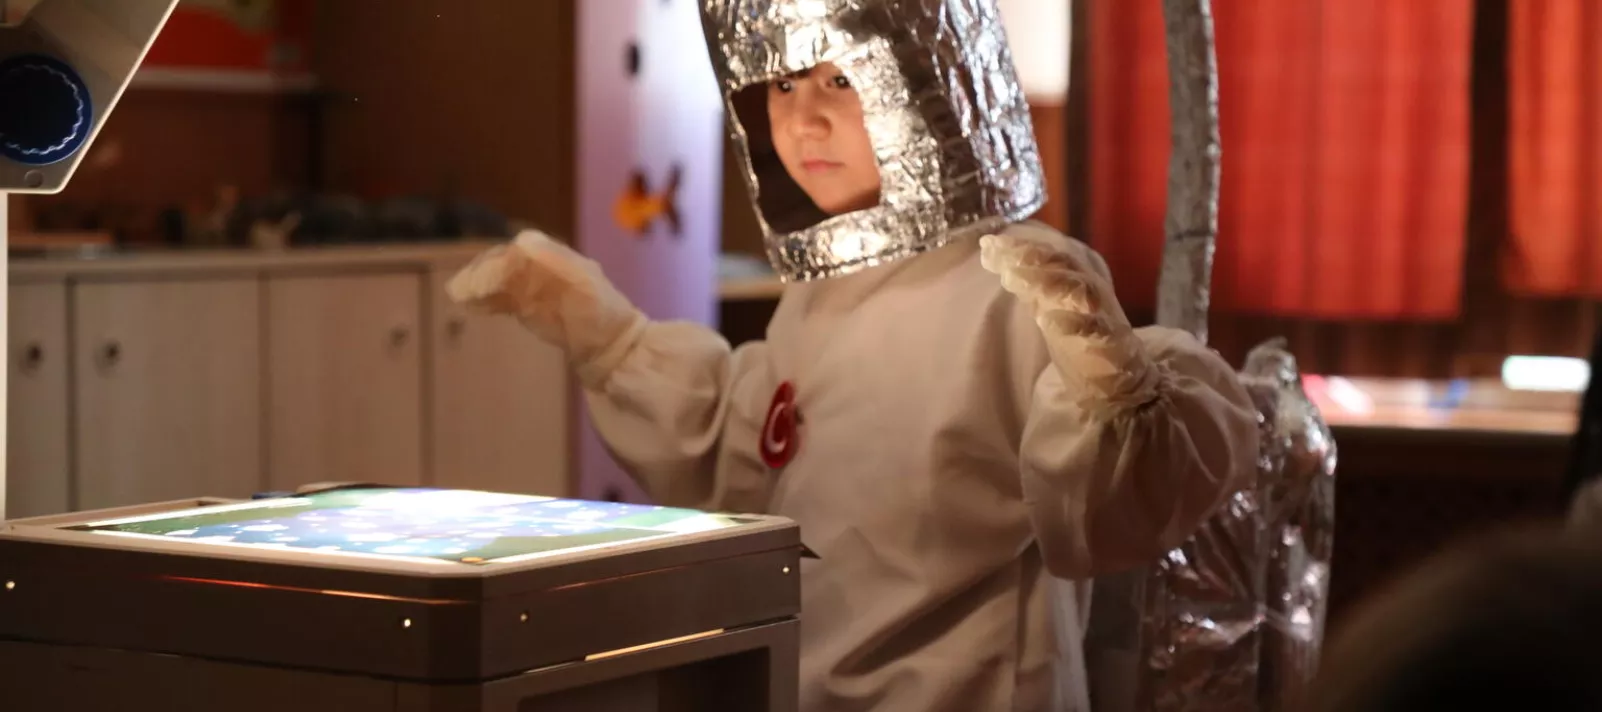 Child in a robot costume doing research